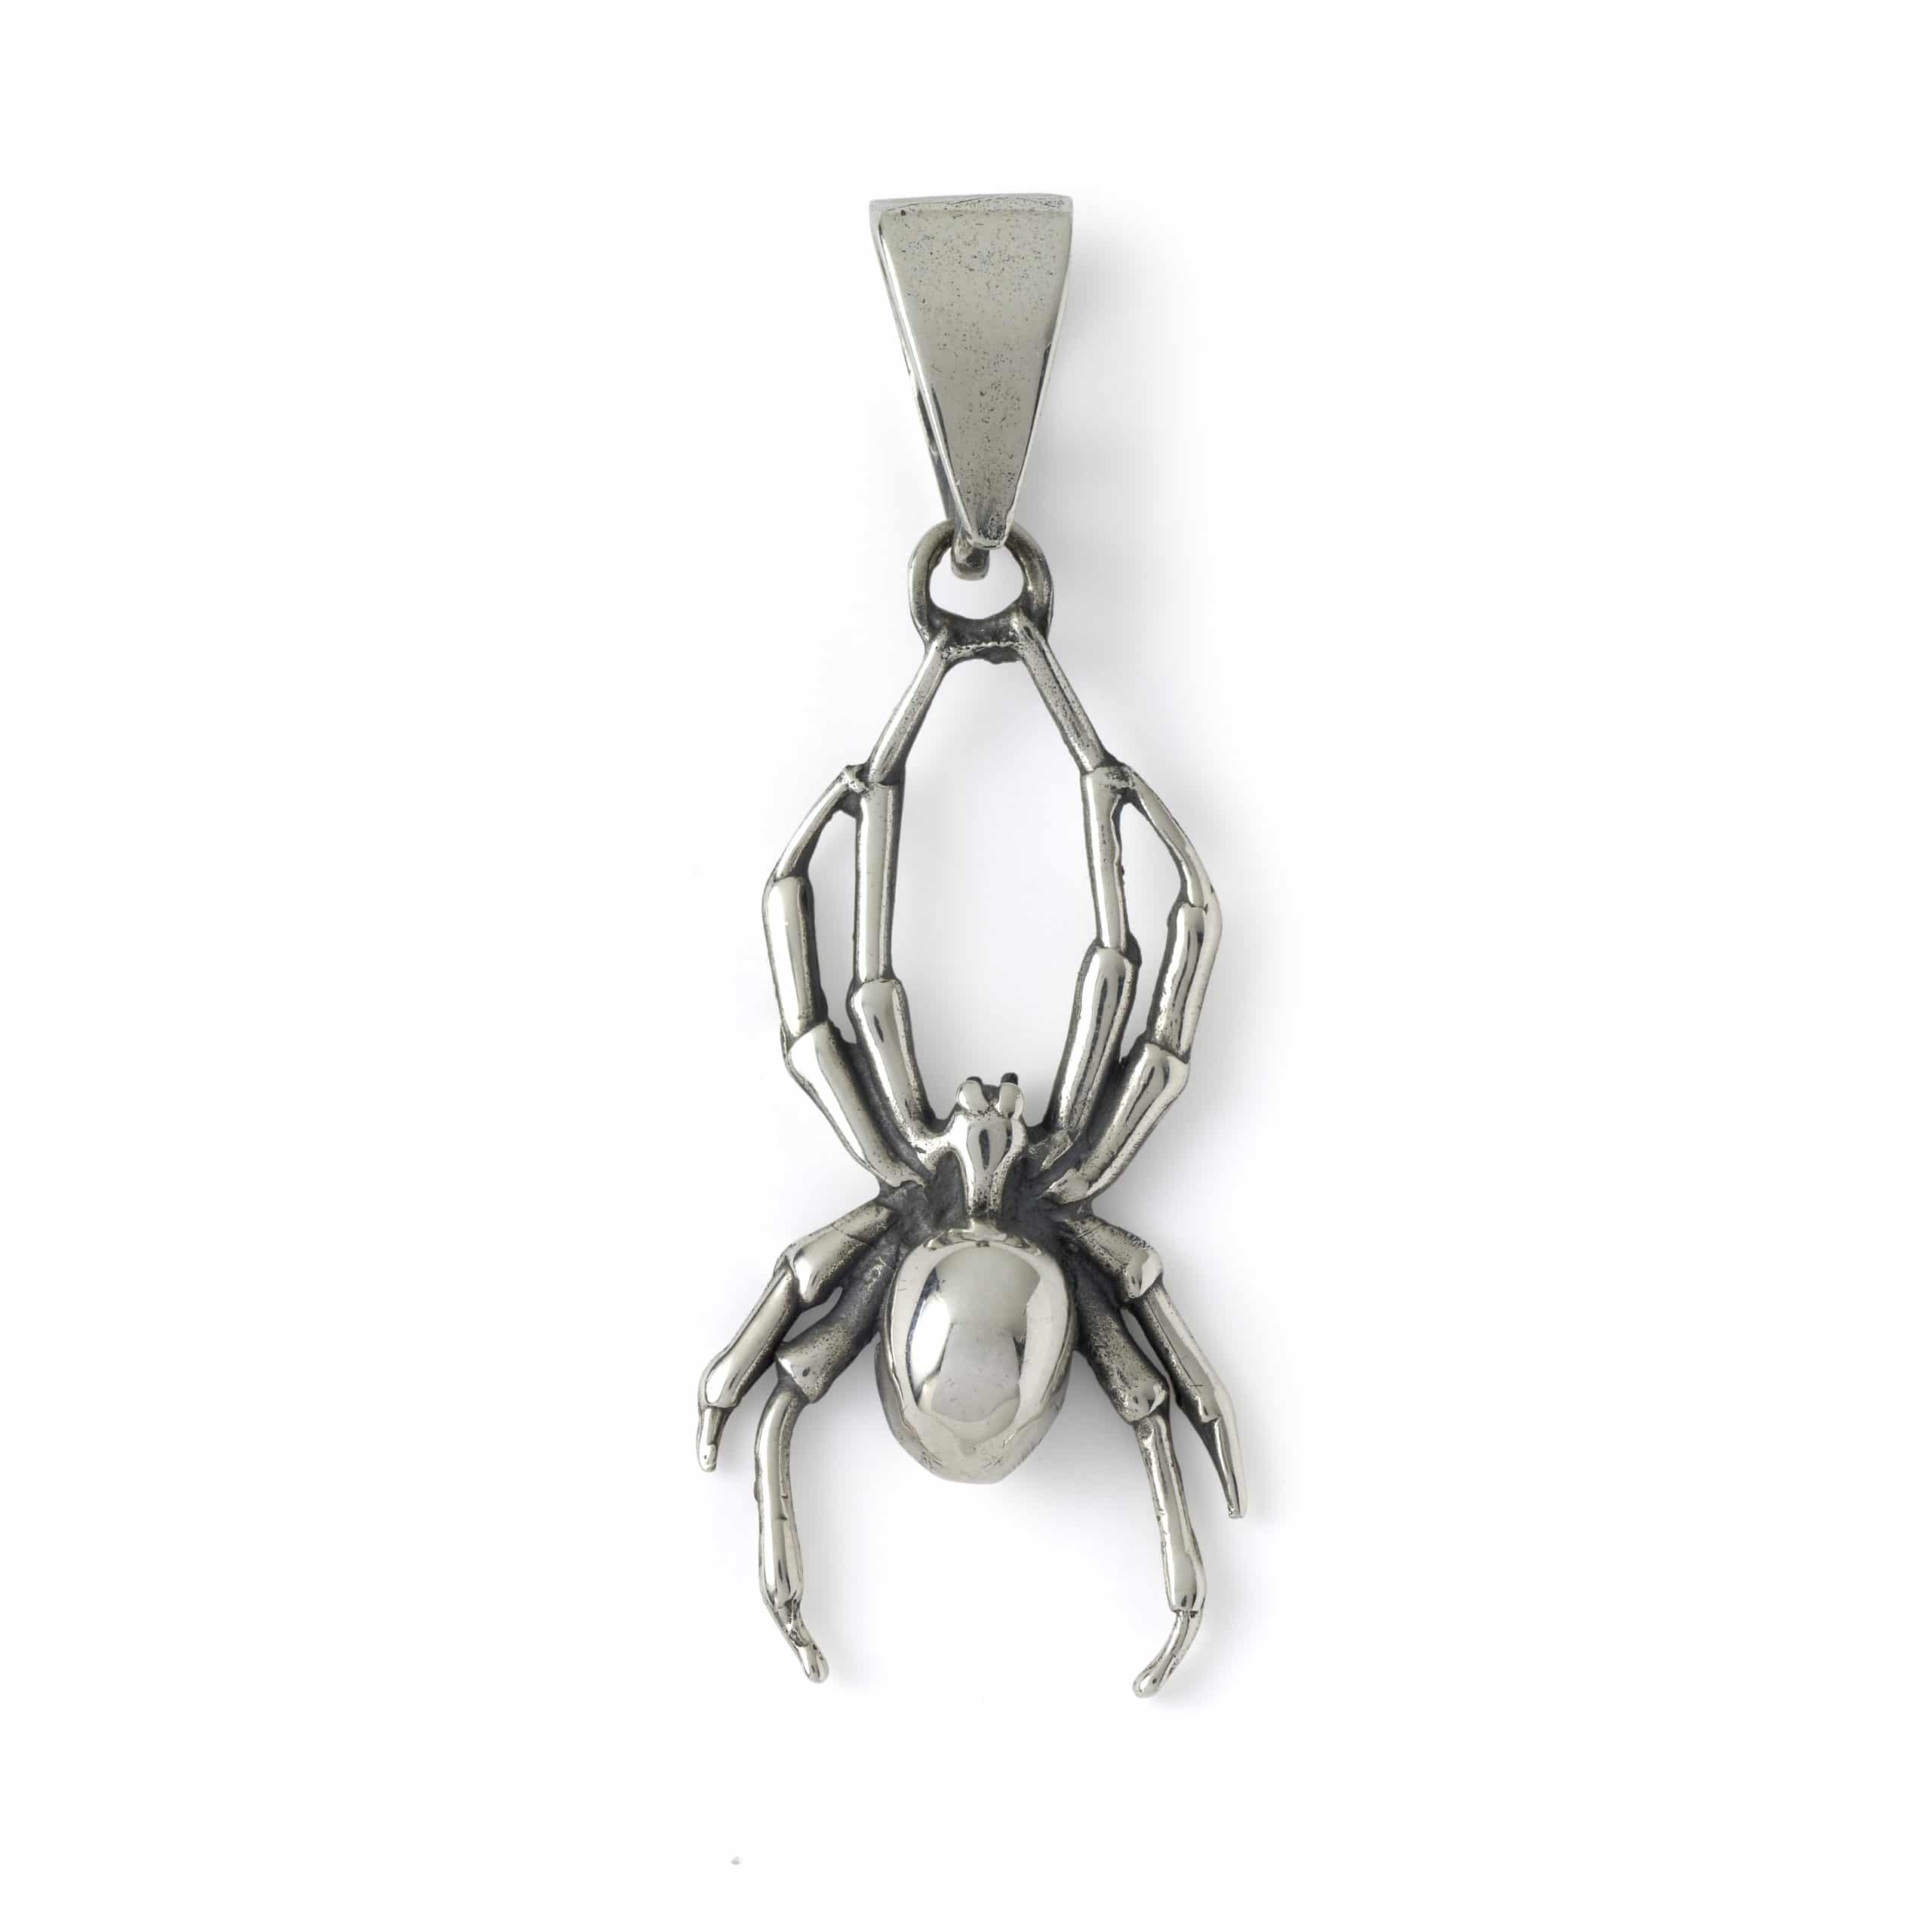 spider-pendant-front-scaled-1.jpg